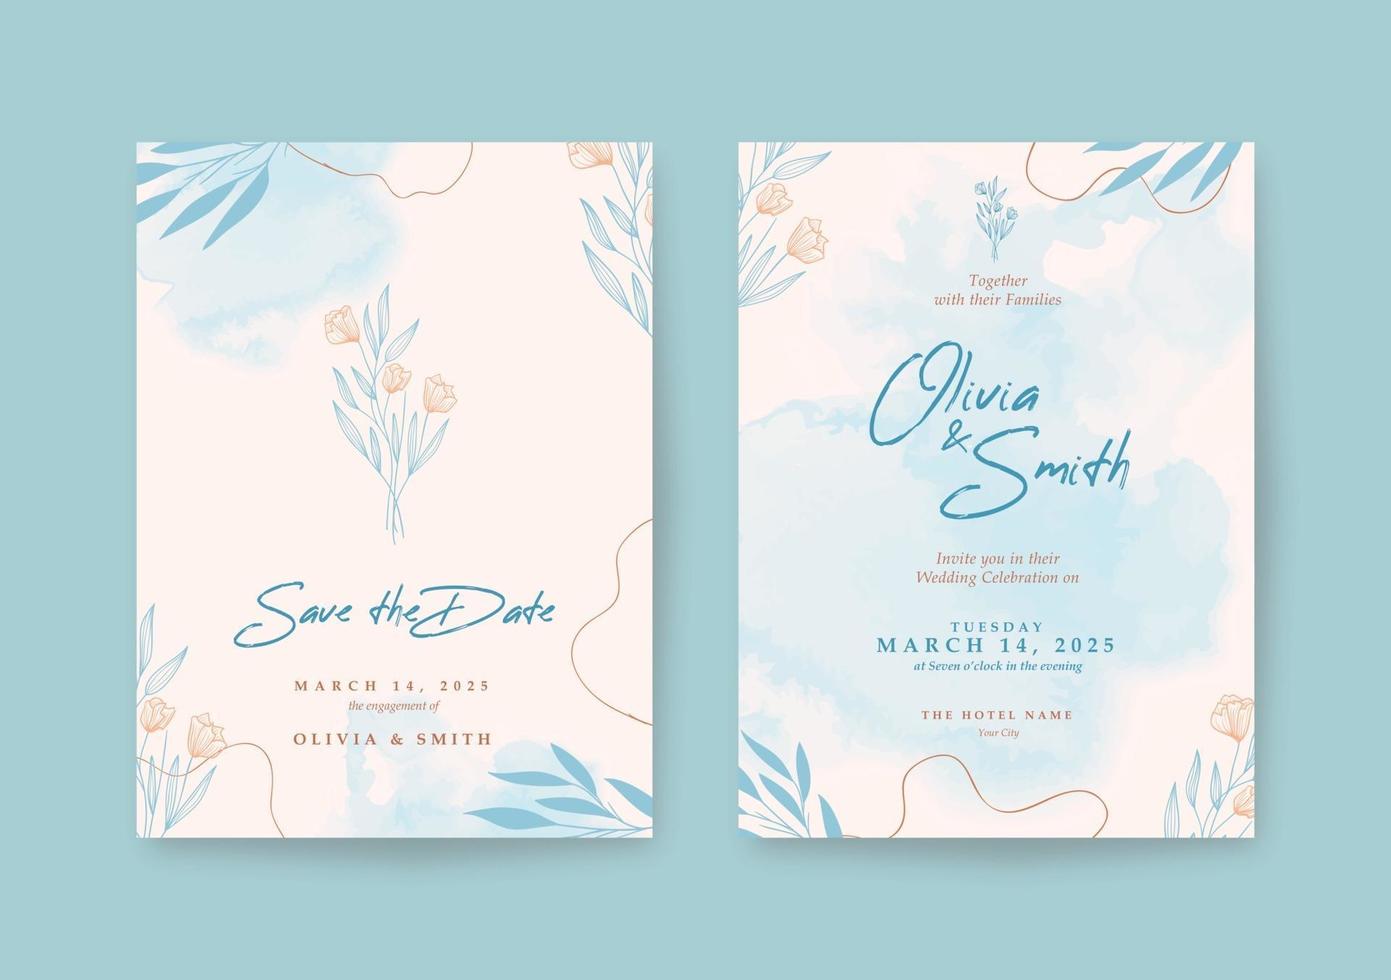 Beautiful wedding invitation with watercolor background vector